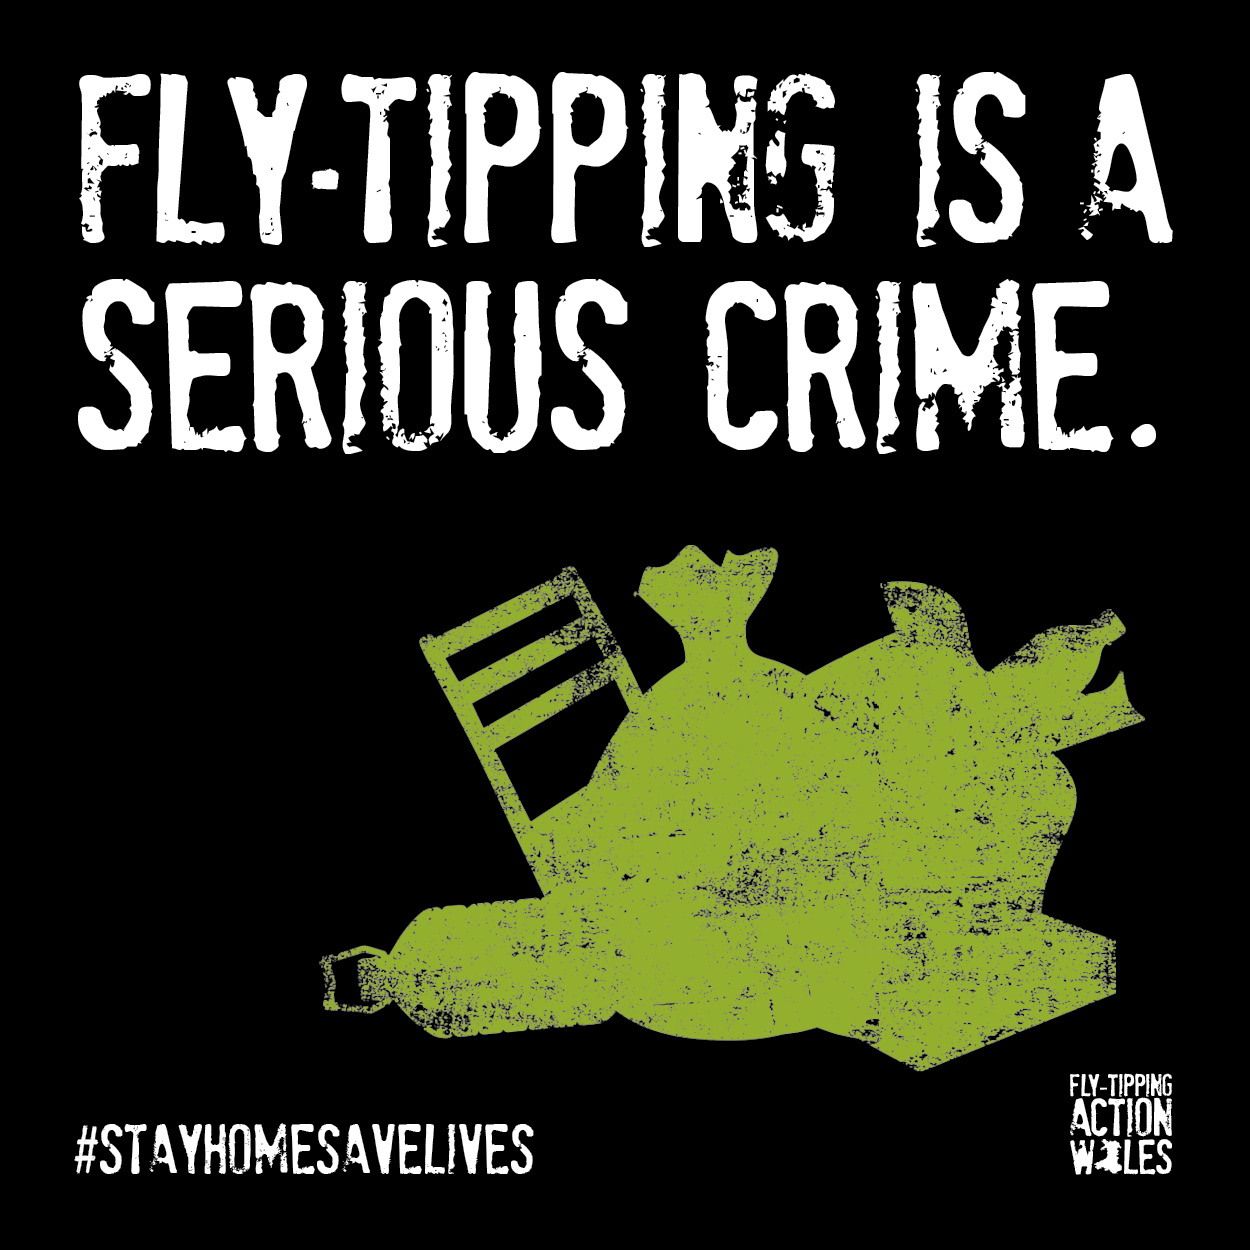 Fly-tipping is a serious crime.jpg